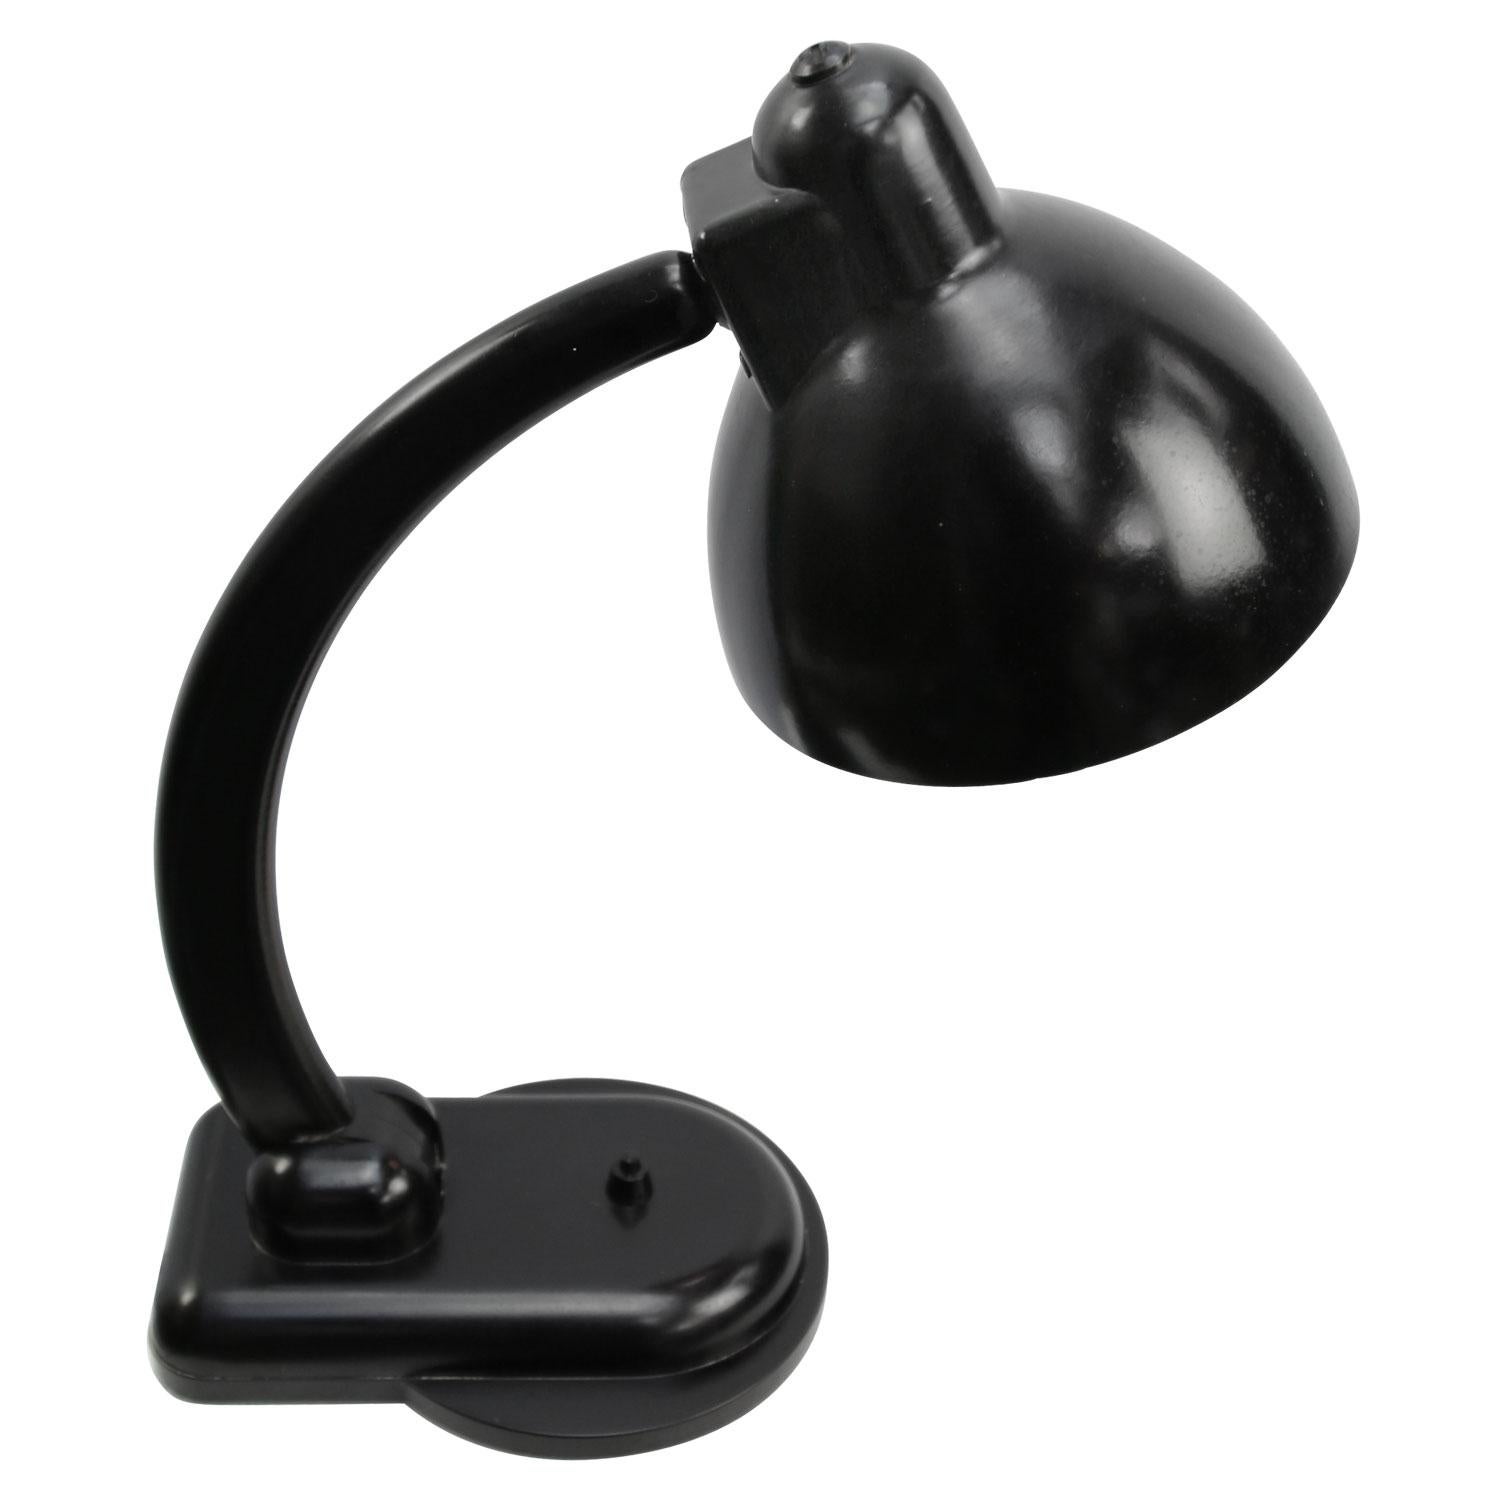 Black bakelite soviet desk lamp
Adjustable in height and angle
Black cotton wire and switch

Weight: 1.90 kg / 4.2 lb

Priced per individual item. All lamps have been made suitable by international standards for incandescent light bulbs,